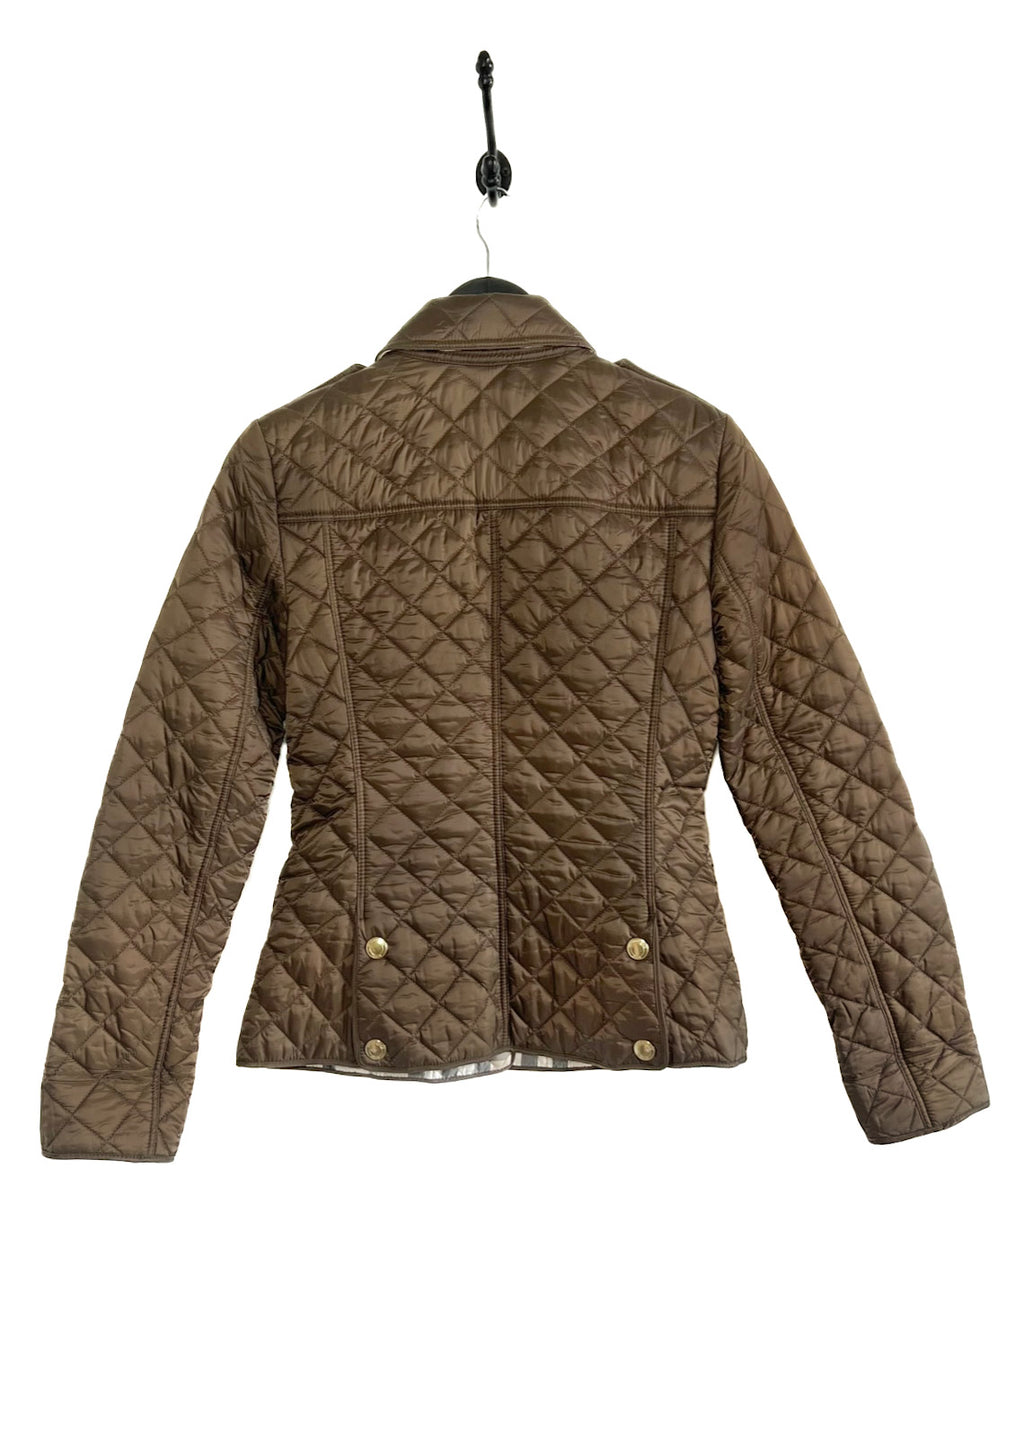 Burberry Brit Kencott Brown Nylon Quilted Jacket